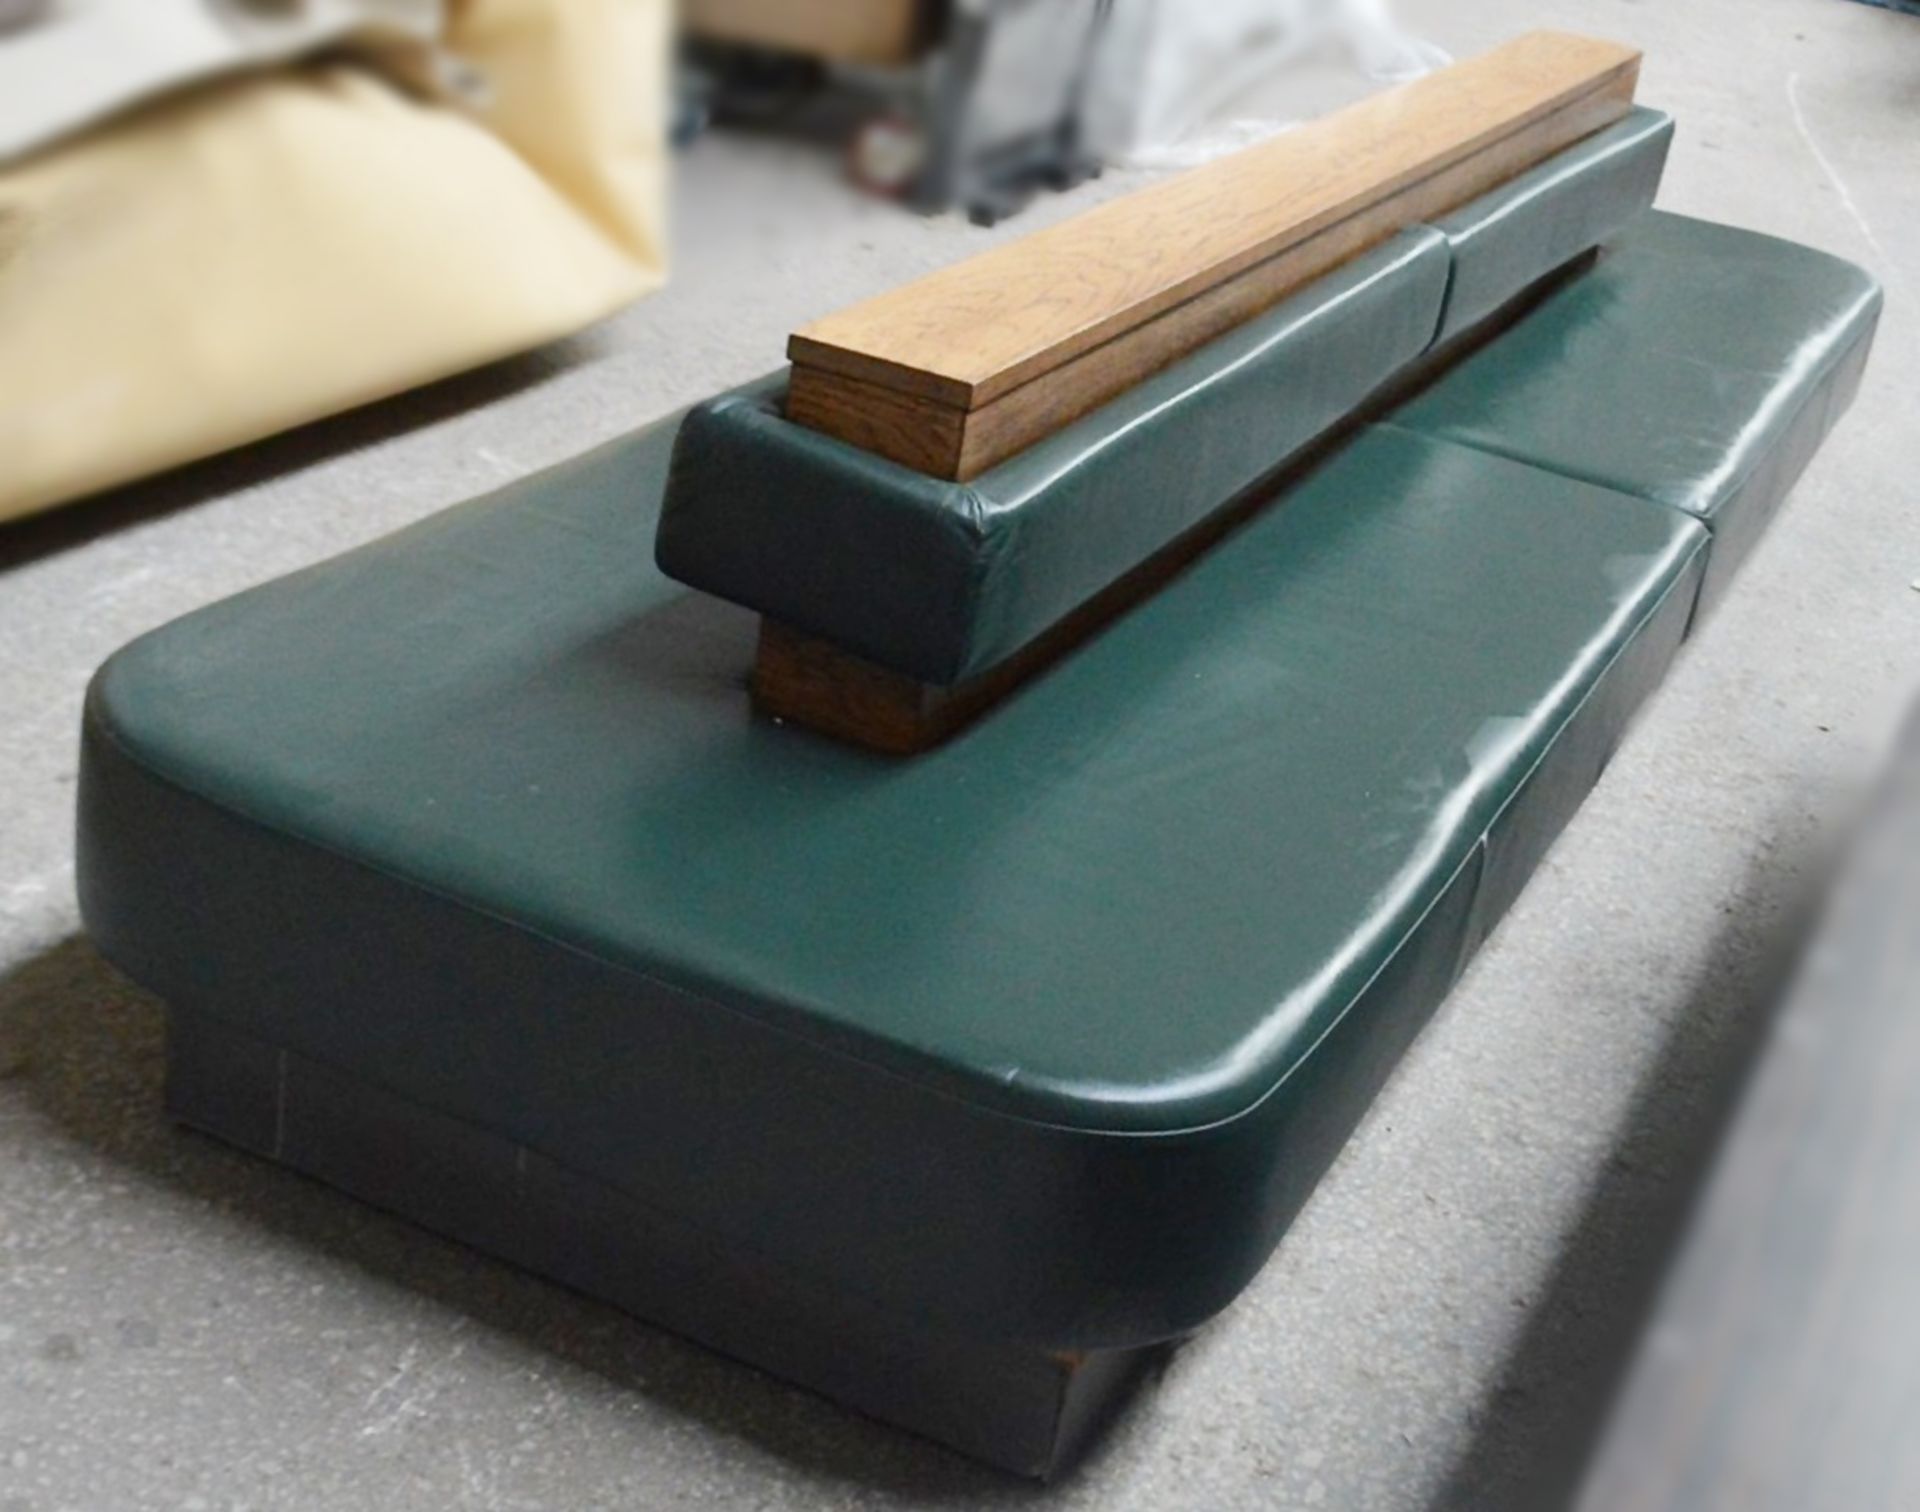 1 x Large Seating Bench Upholstered In A Green Faux Leather - Dimensions: H62 x W285 x D88cm - Image 4 of 4